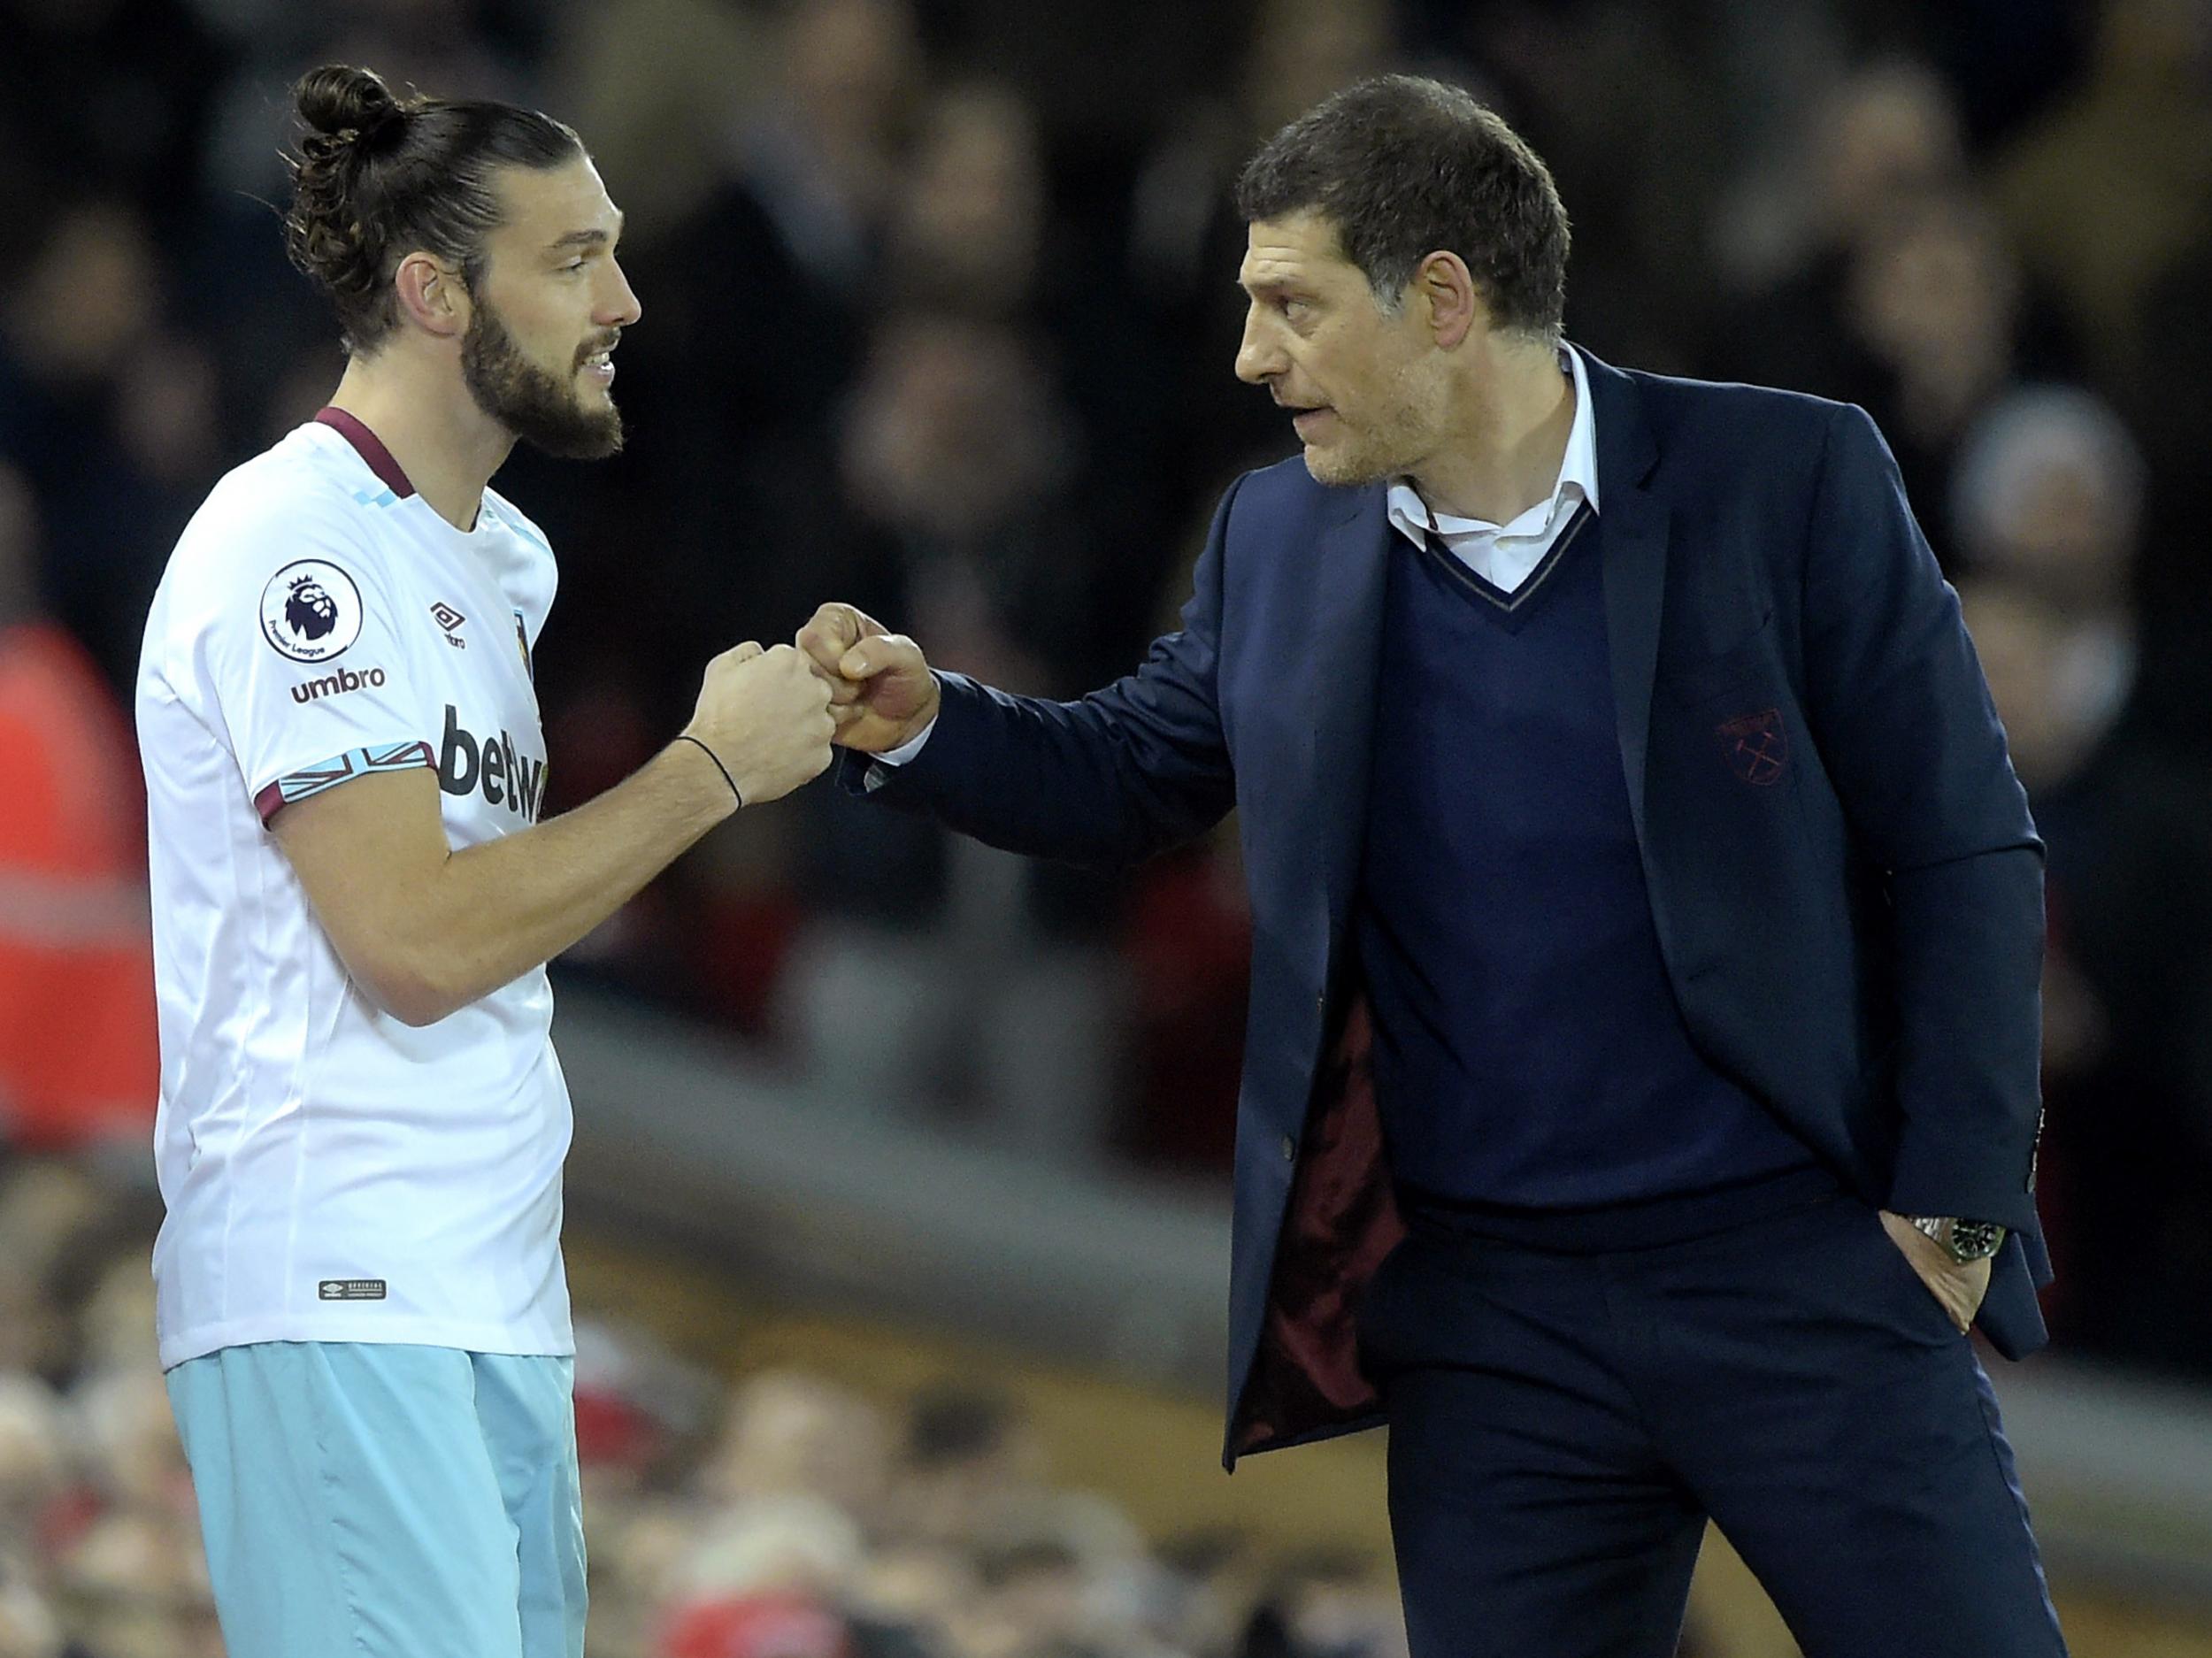 The striker has delighted Bilic since returning from injury